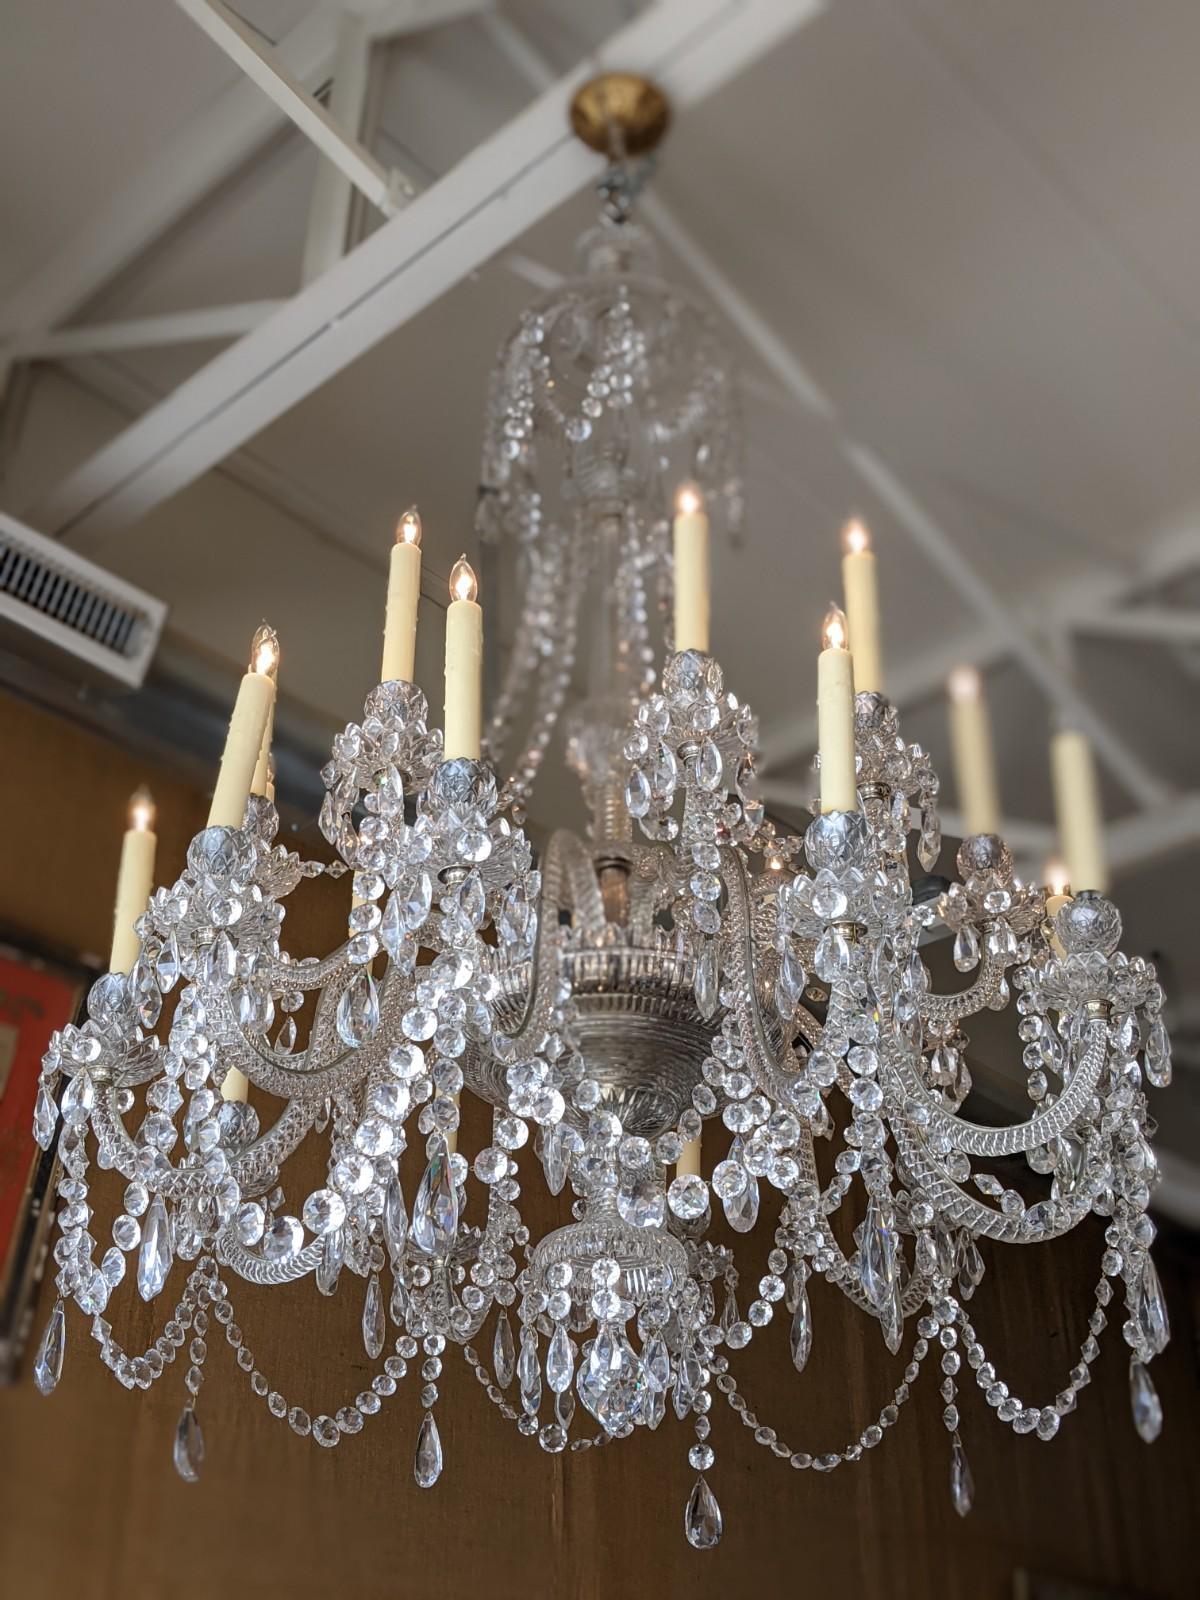 Early Baccarat Crystal Chandelier from France In Good Condition For Sale In Dallas, TX